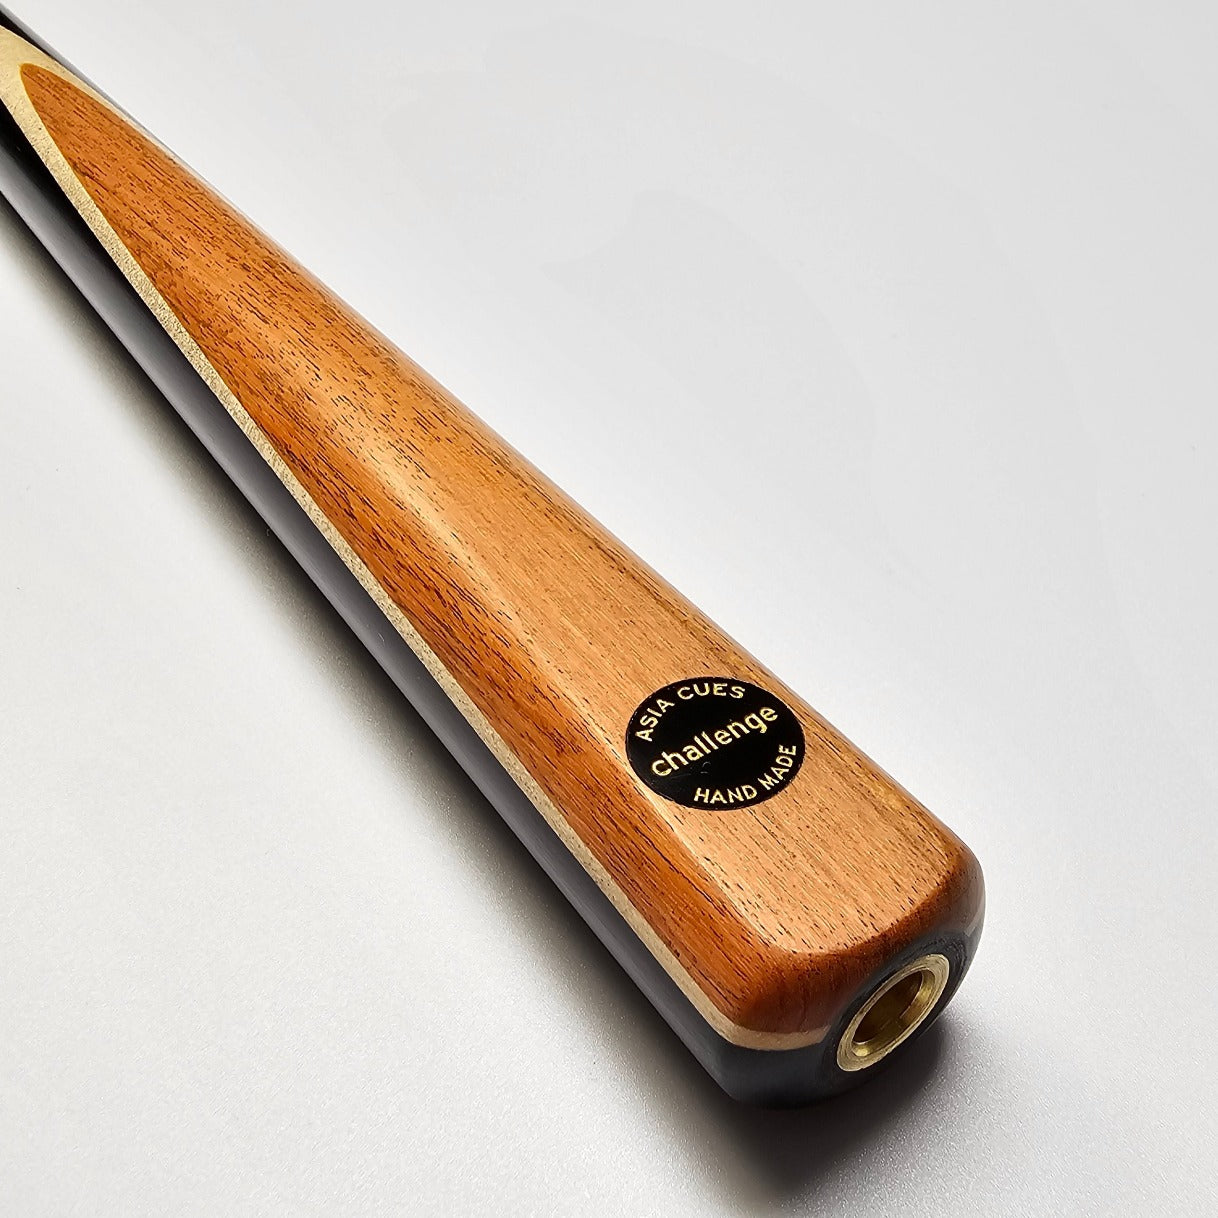 Asia Cues Challenge Range Ebony Butt with Burrwood front splice and Thick Birdseye Maple Veneer. Badge View